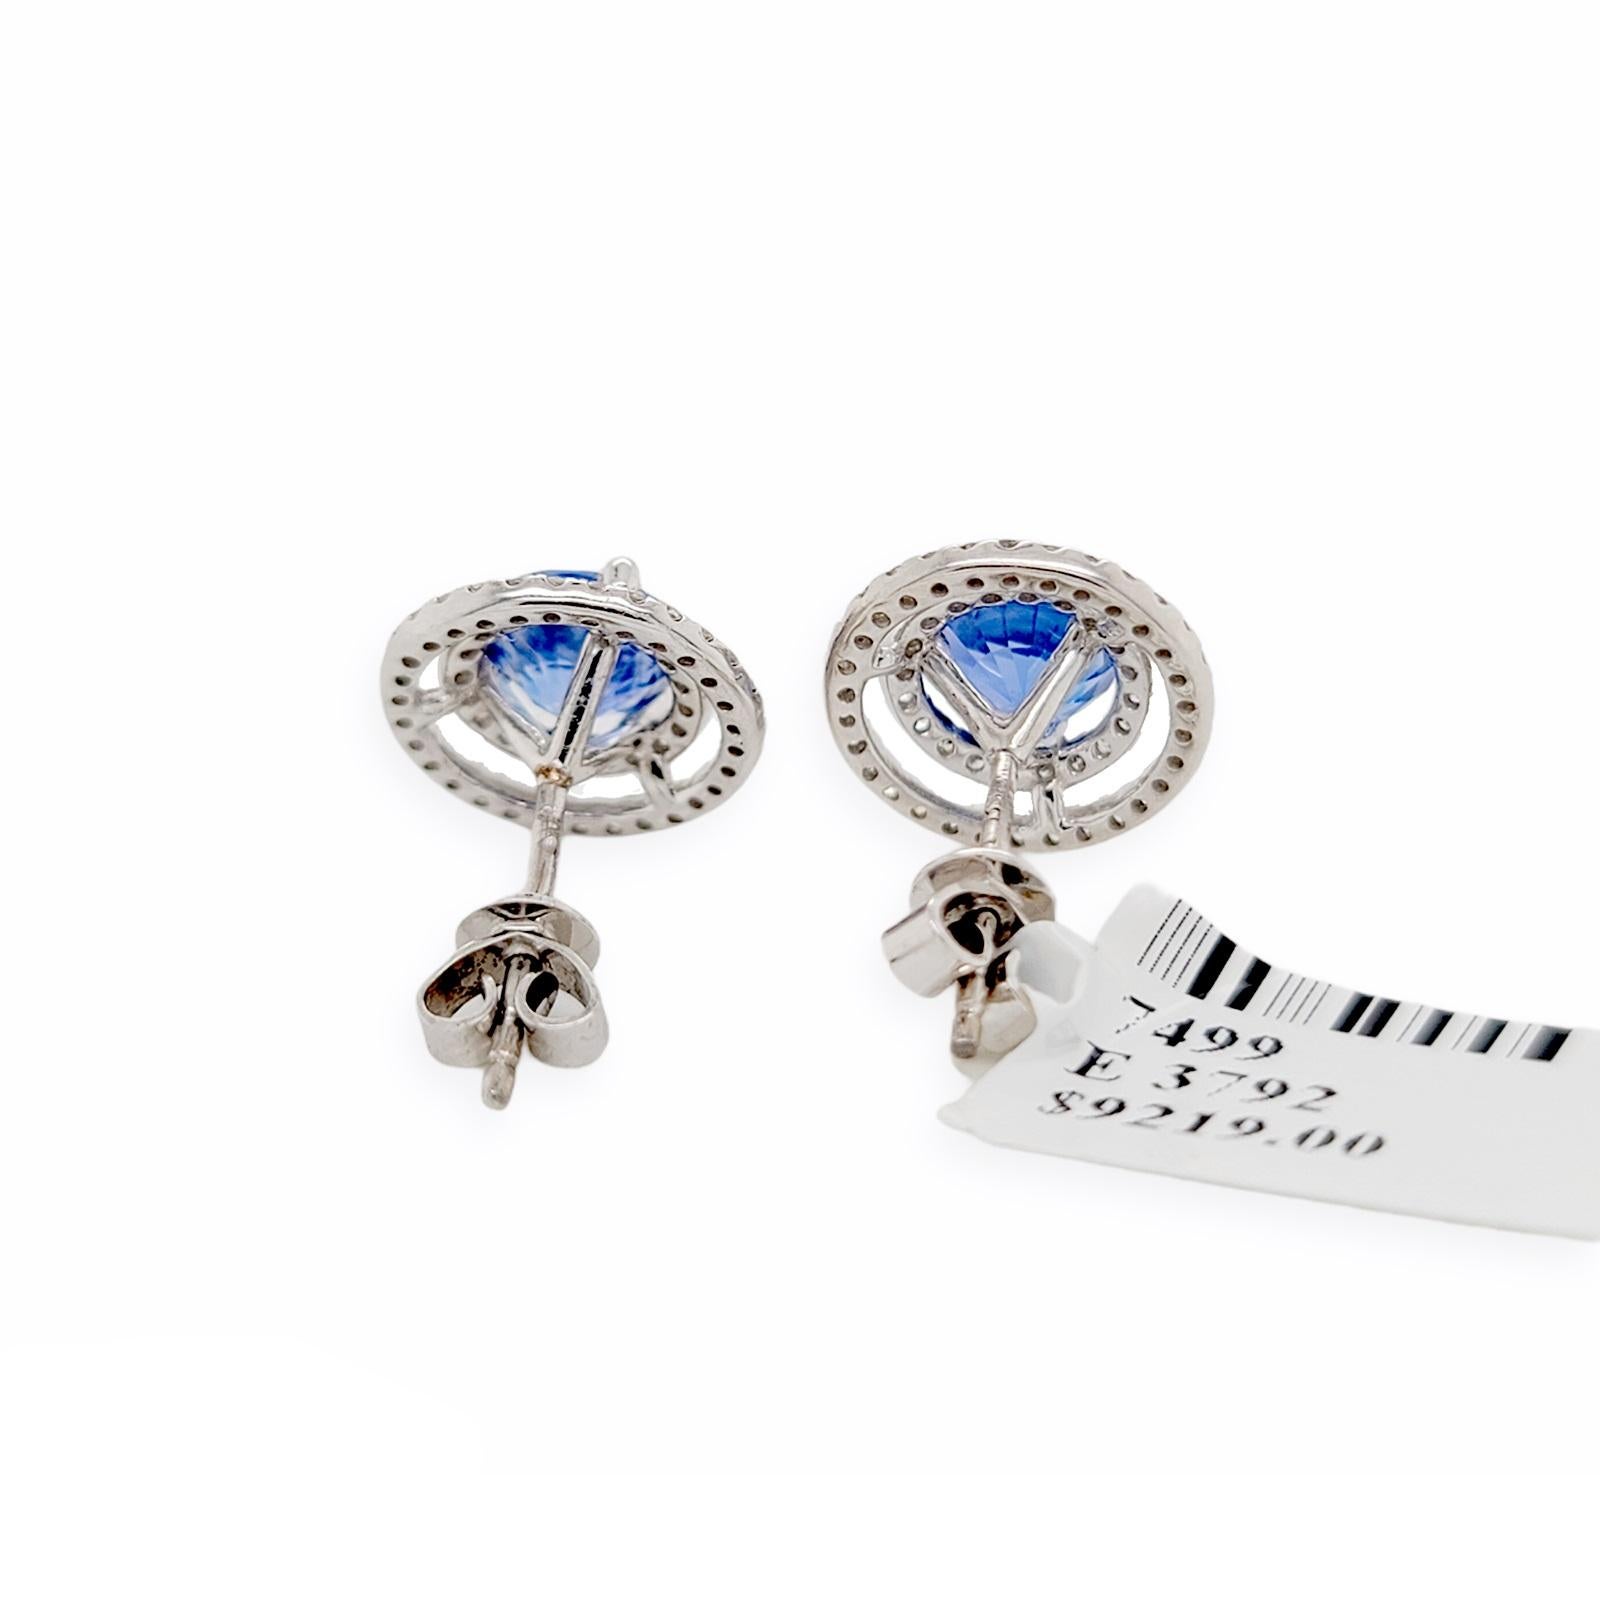 2.26 Ct Natural Blue Sapphire & 0.47 Ct Diamonds 14k White Gold Stud Earrings In Excellent Condition For Sale In Los Angeles, CA